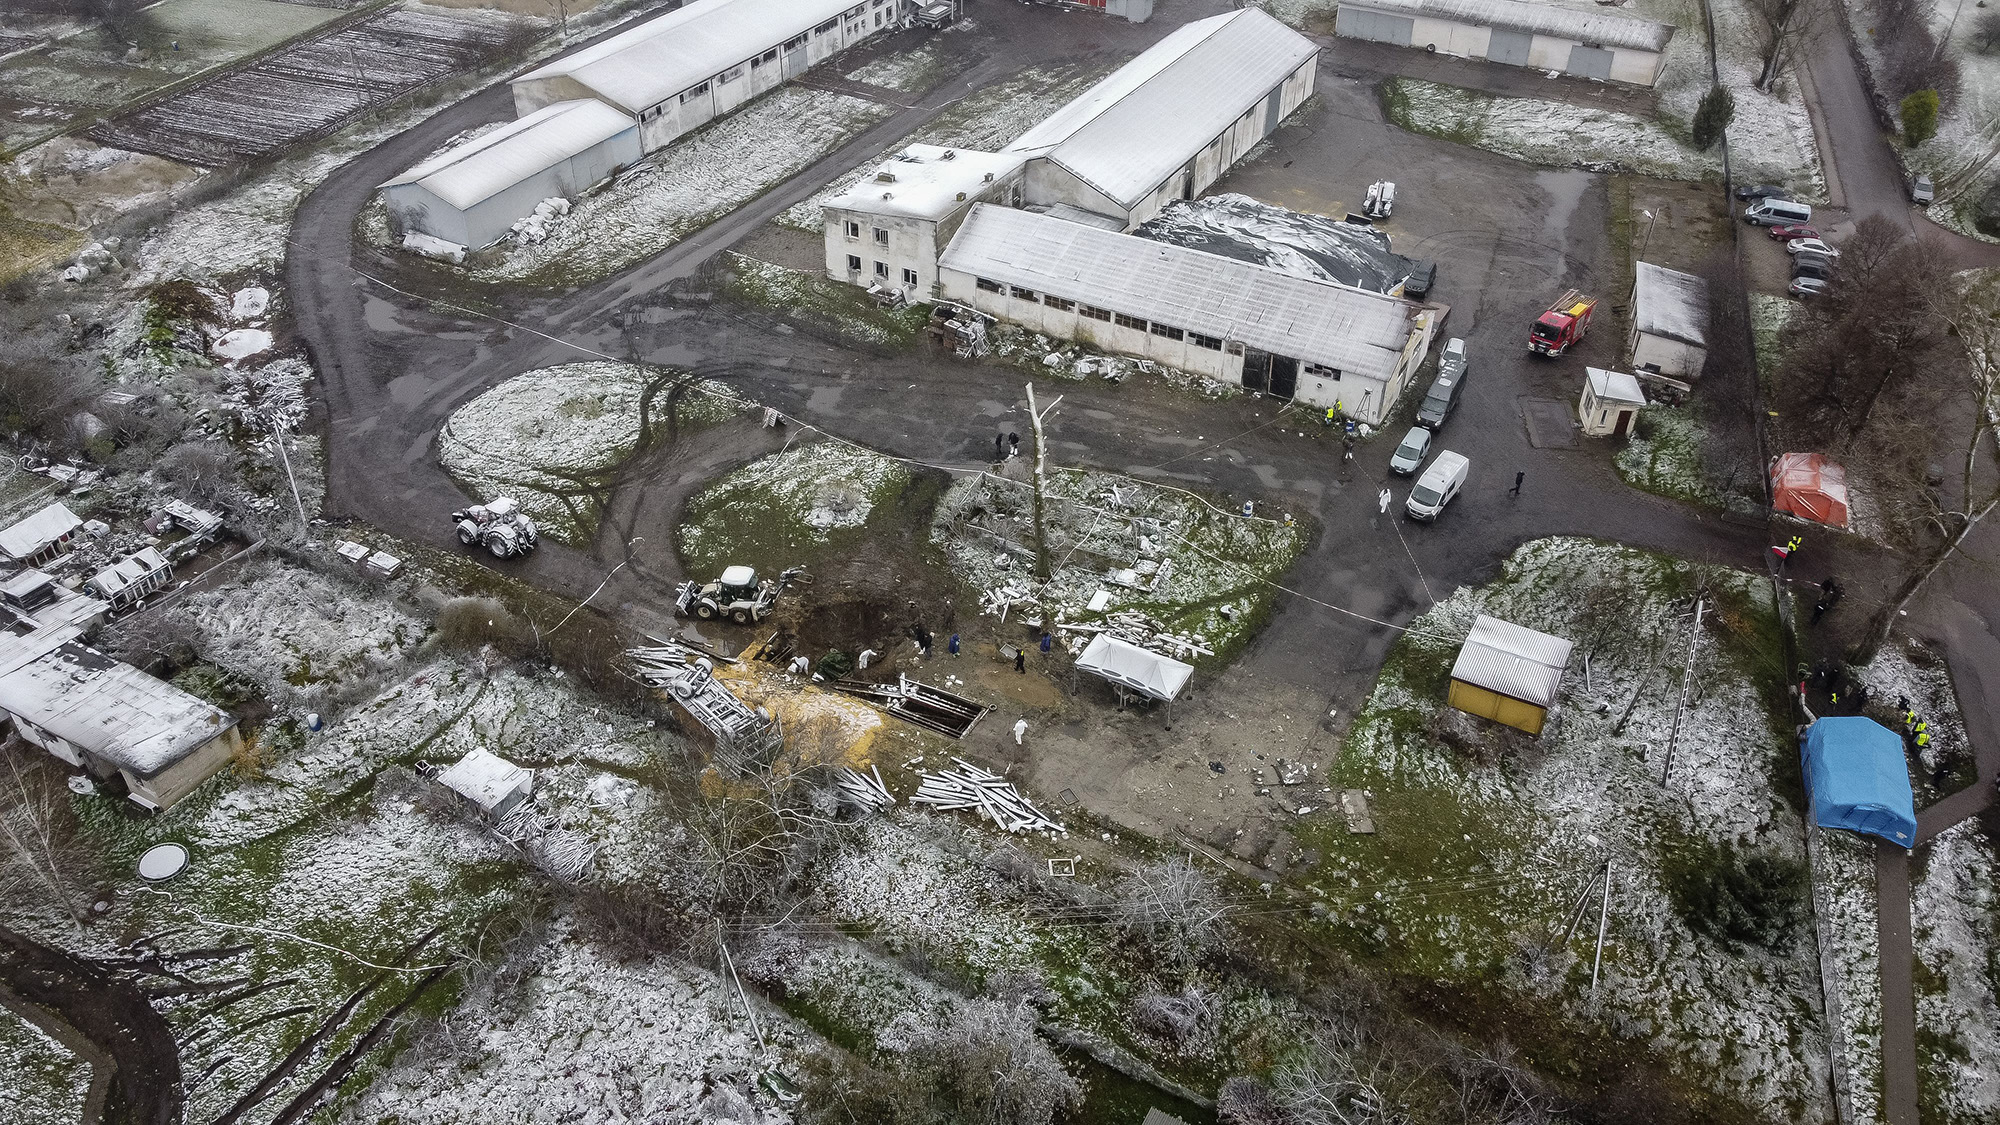 Aerial showing the site where a missile strike killed two men in the eastern Poland village of Przewodow, near the border with Ukraine, November 17.